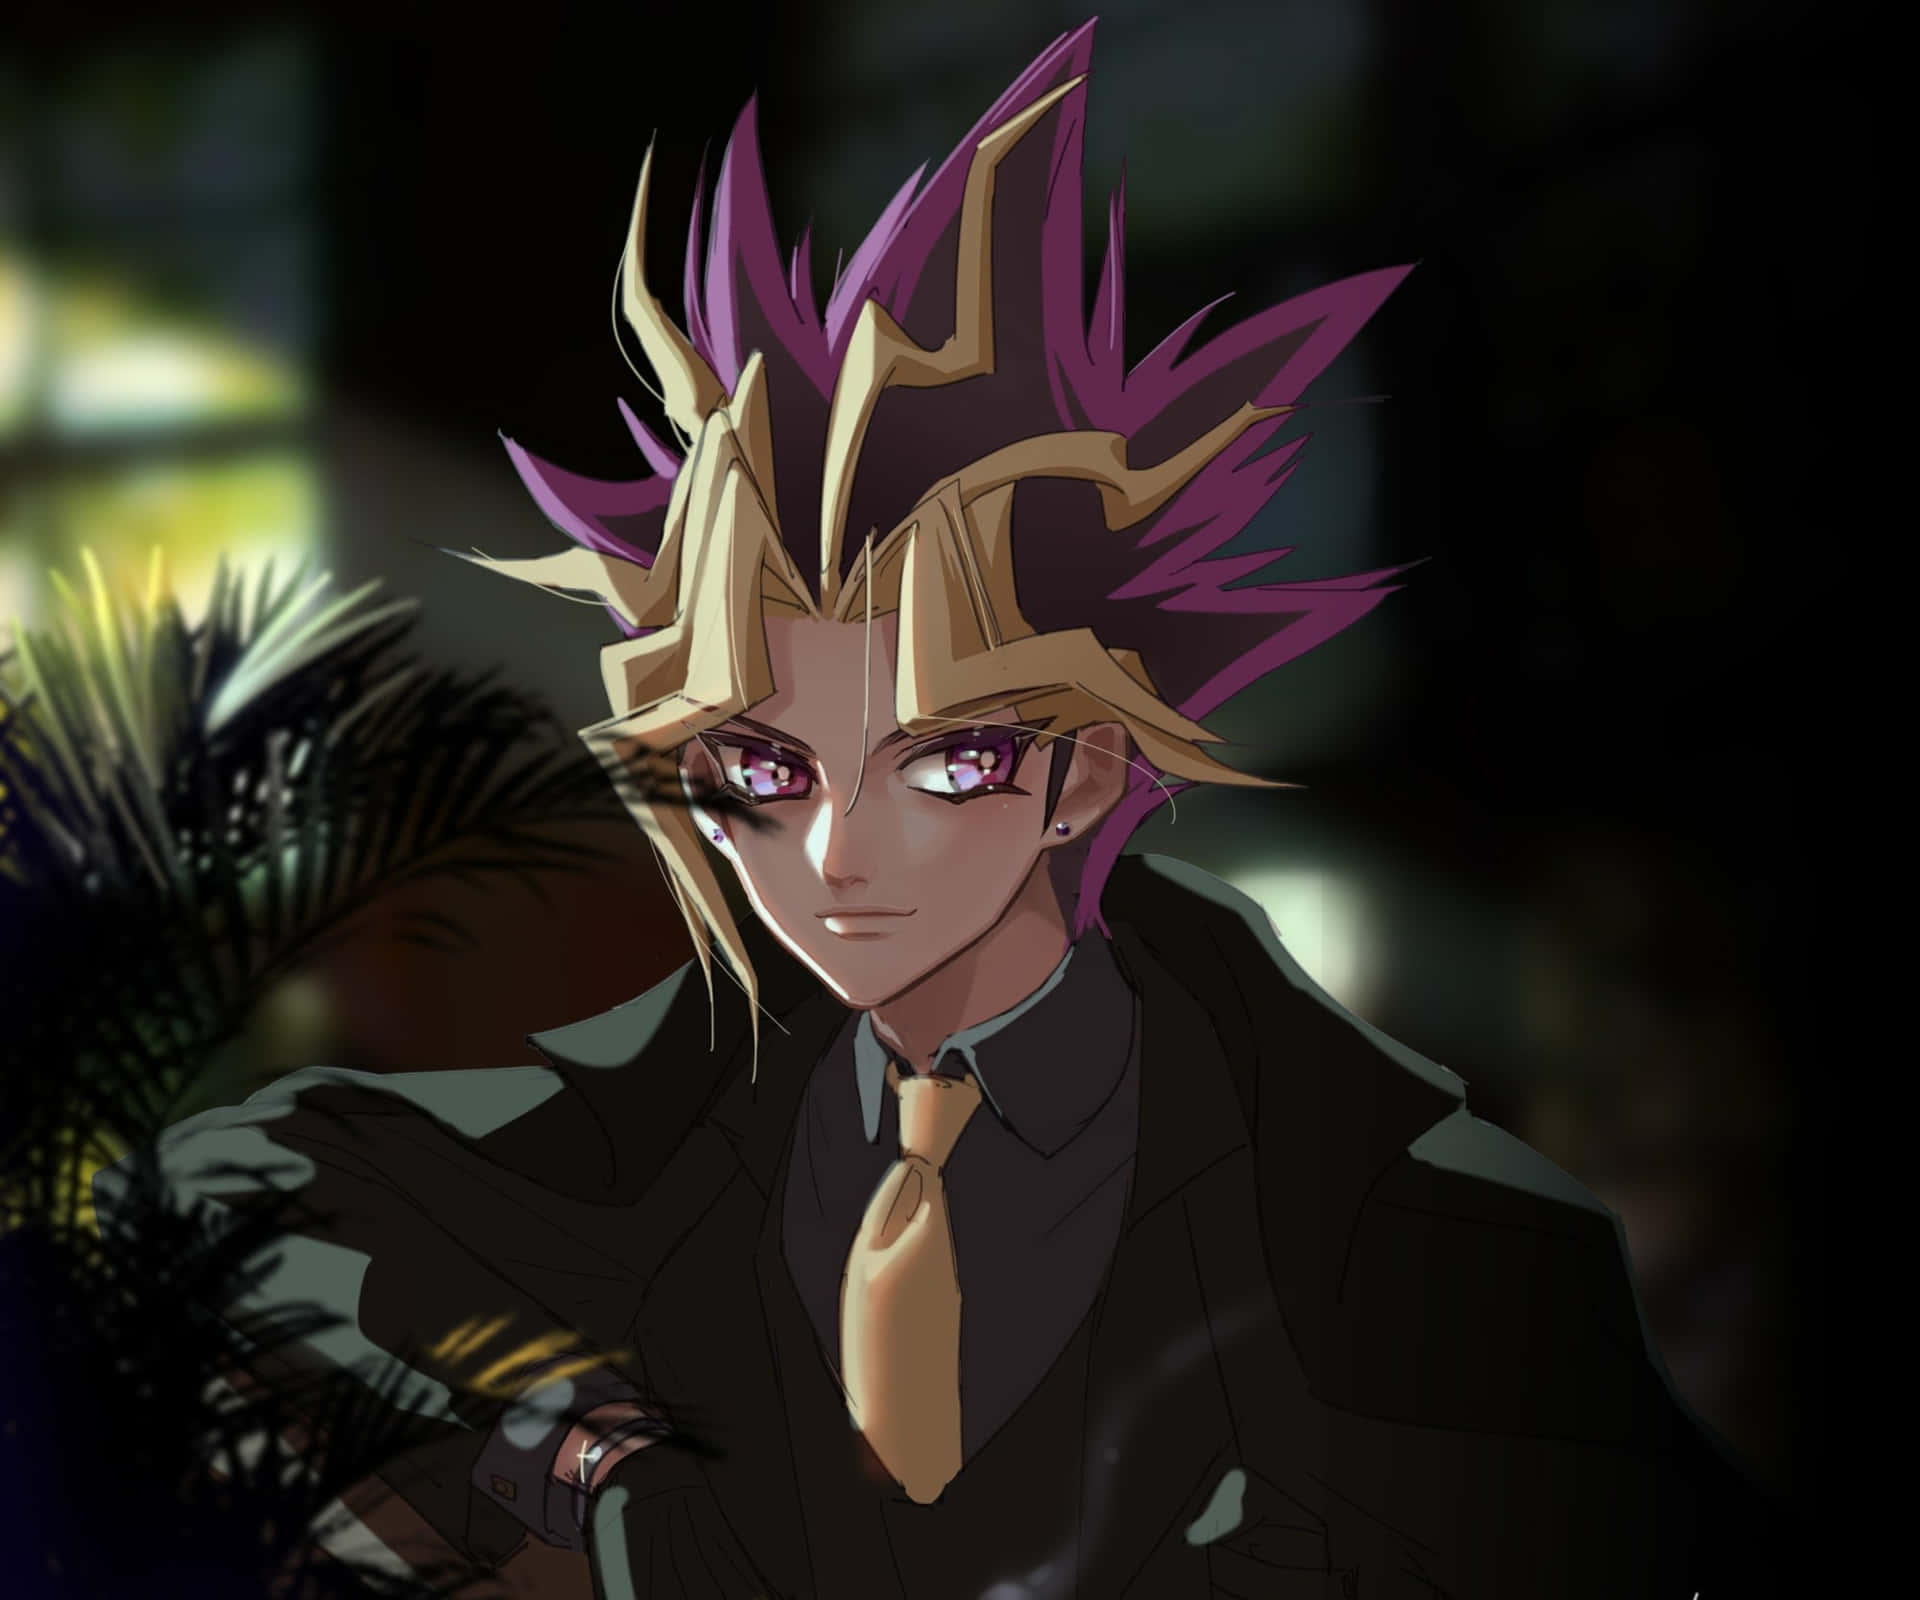 Yami Yugi, the King of Games, in Competitive Stance Wallpaper